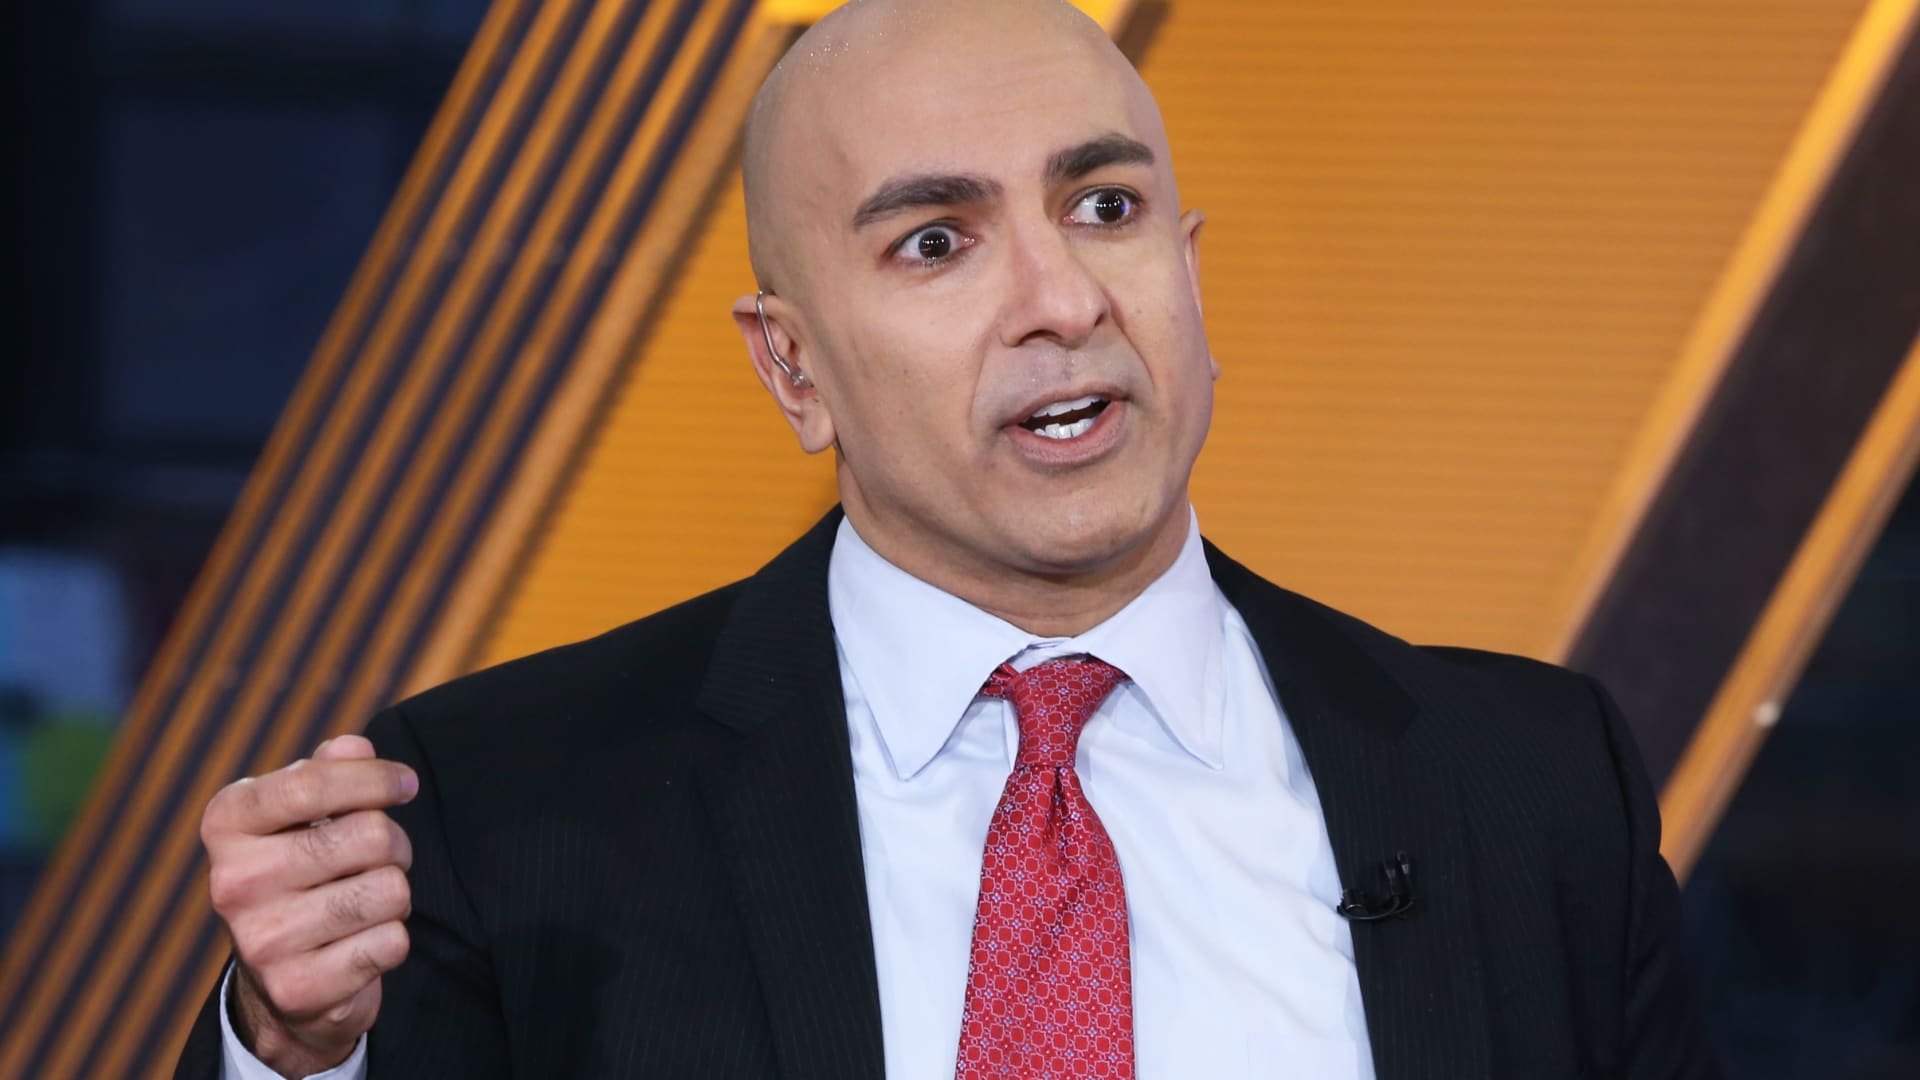 Fed’s Kashkari says a June pause on rates wouldn’t indicate an end to hiking cycle